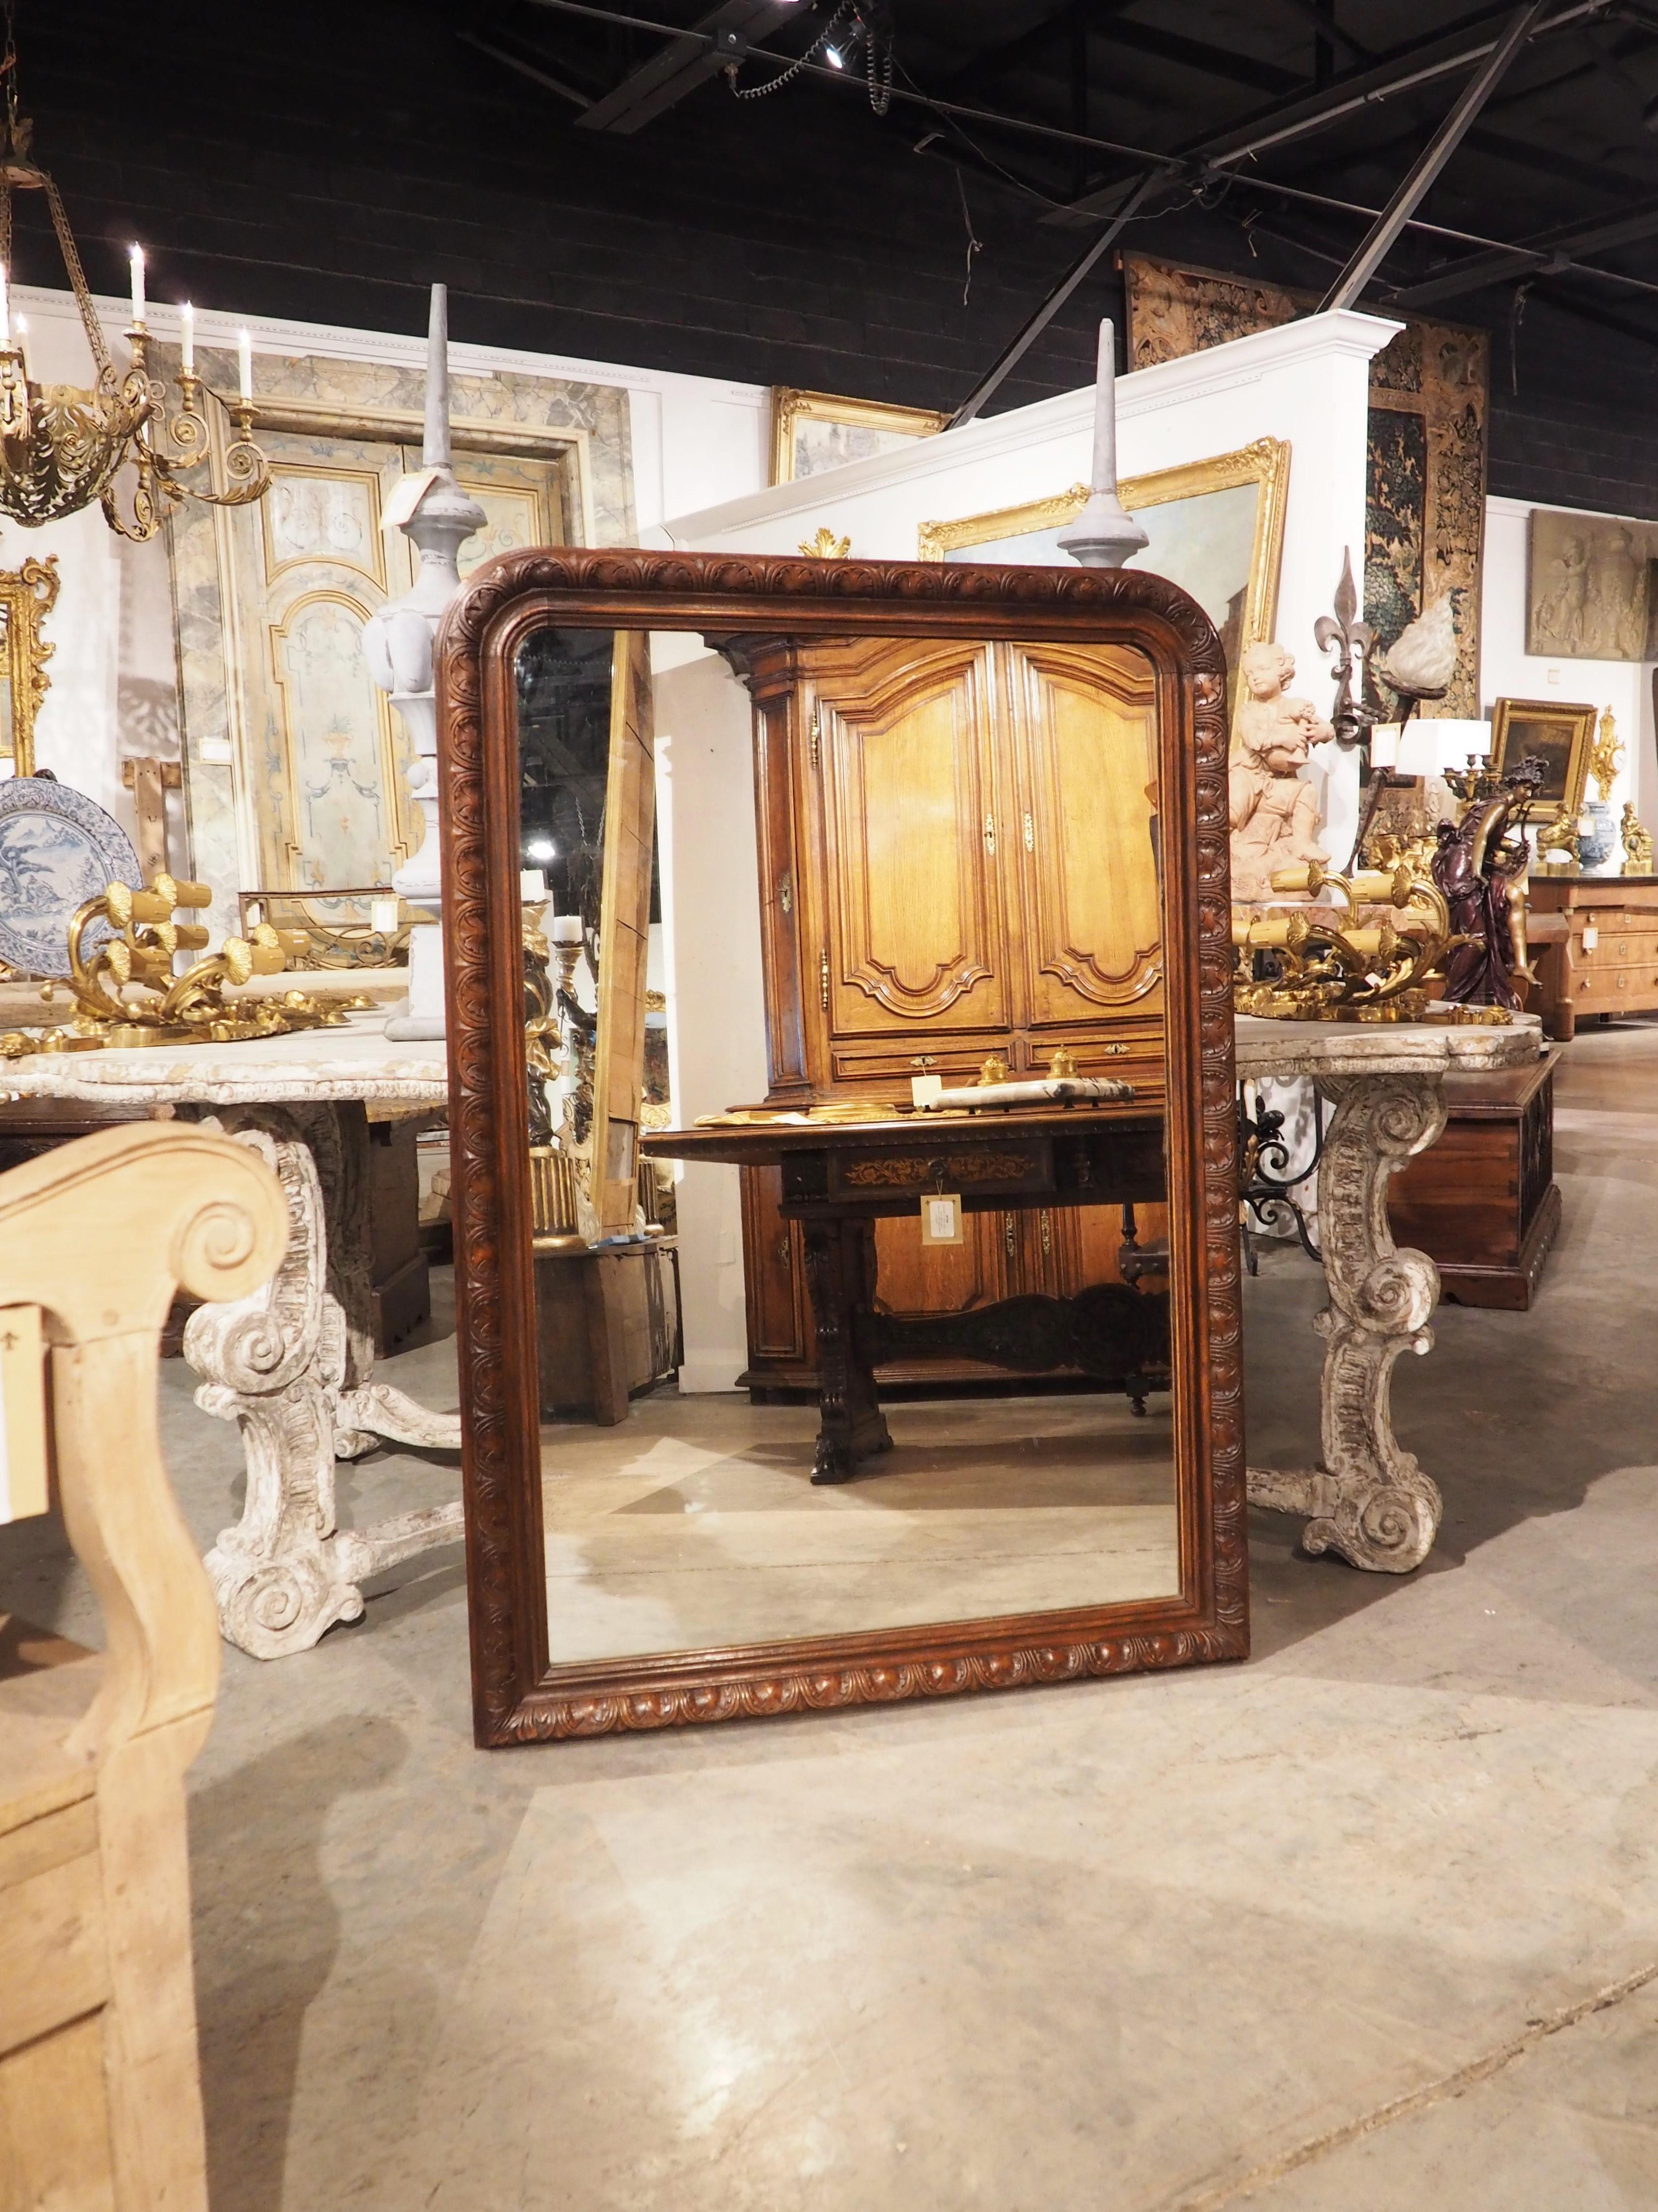 An unusual production of a timeless piece of furniture/decorative accessory, this Louis Philippe style mirror features a wood frame with a rich, natural stain. Typically, a Louis Philippe mirror has a wooden frame covered with plaster or gesso,